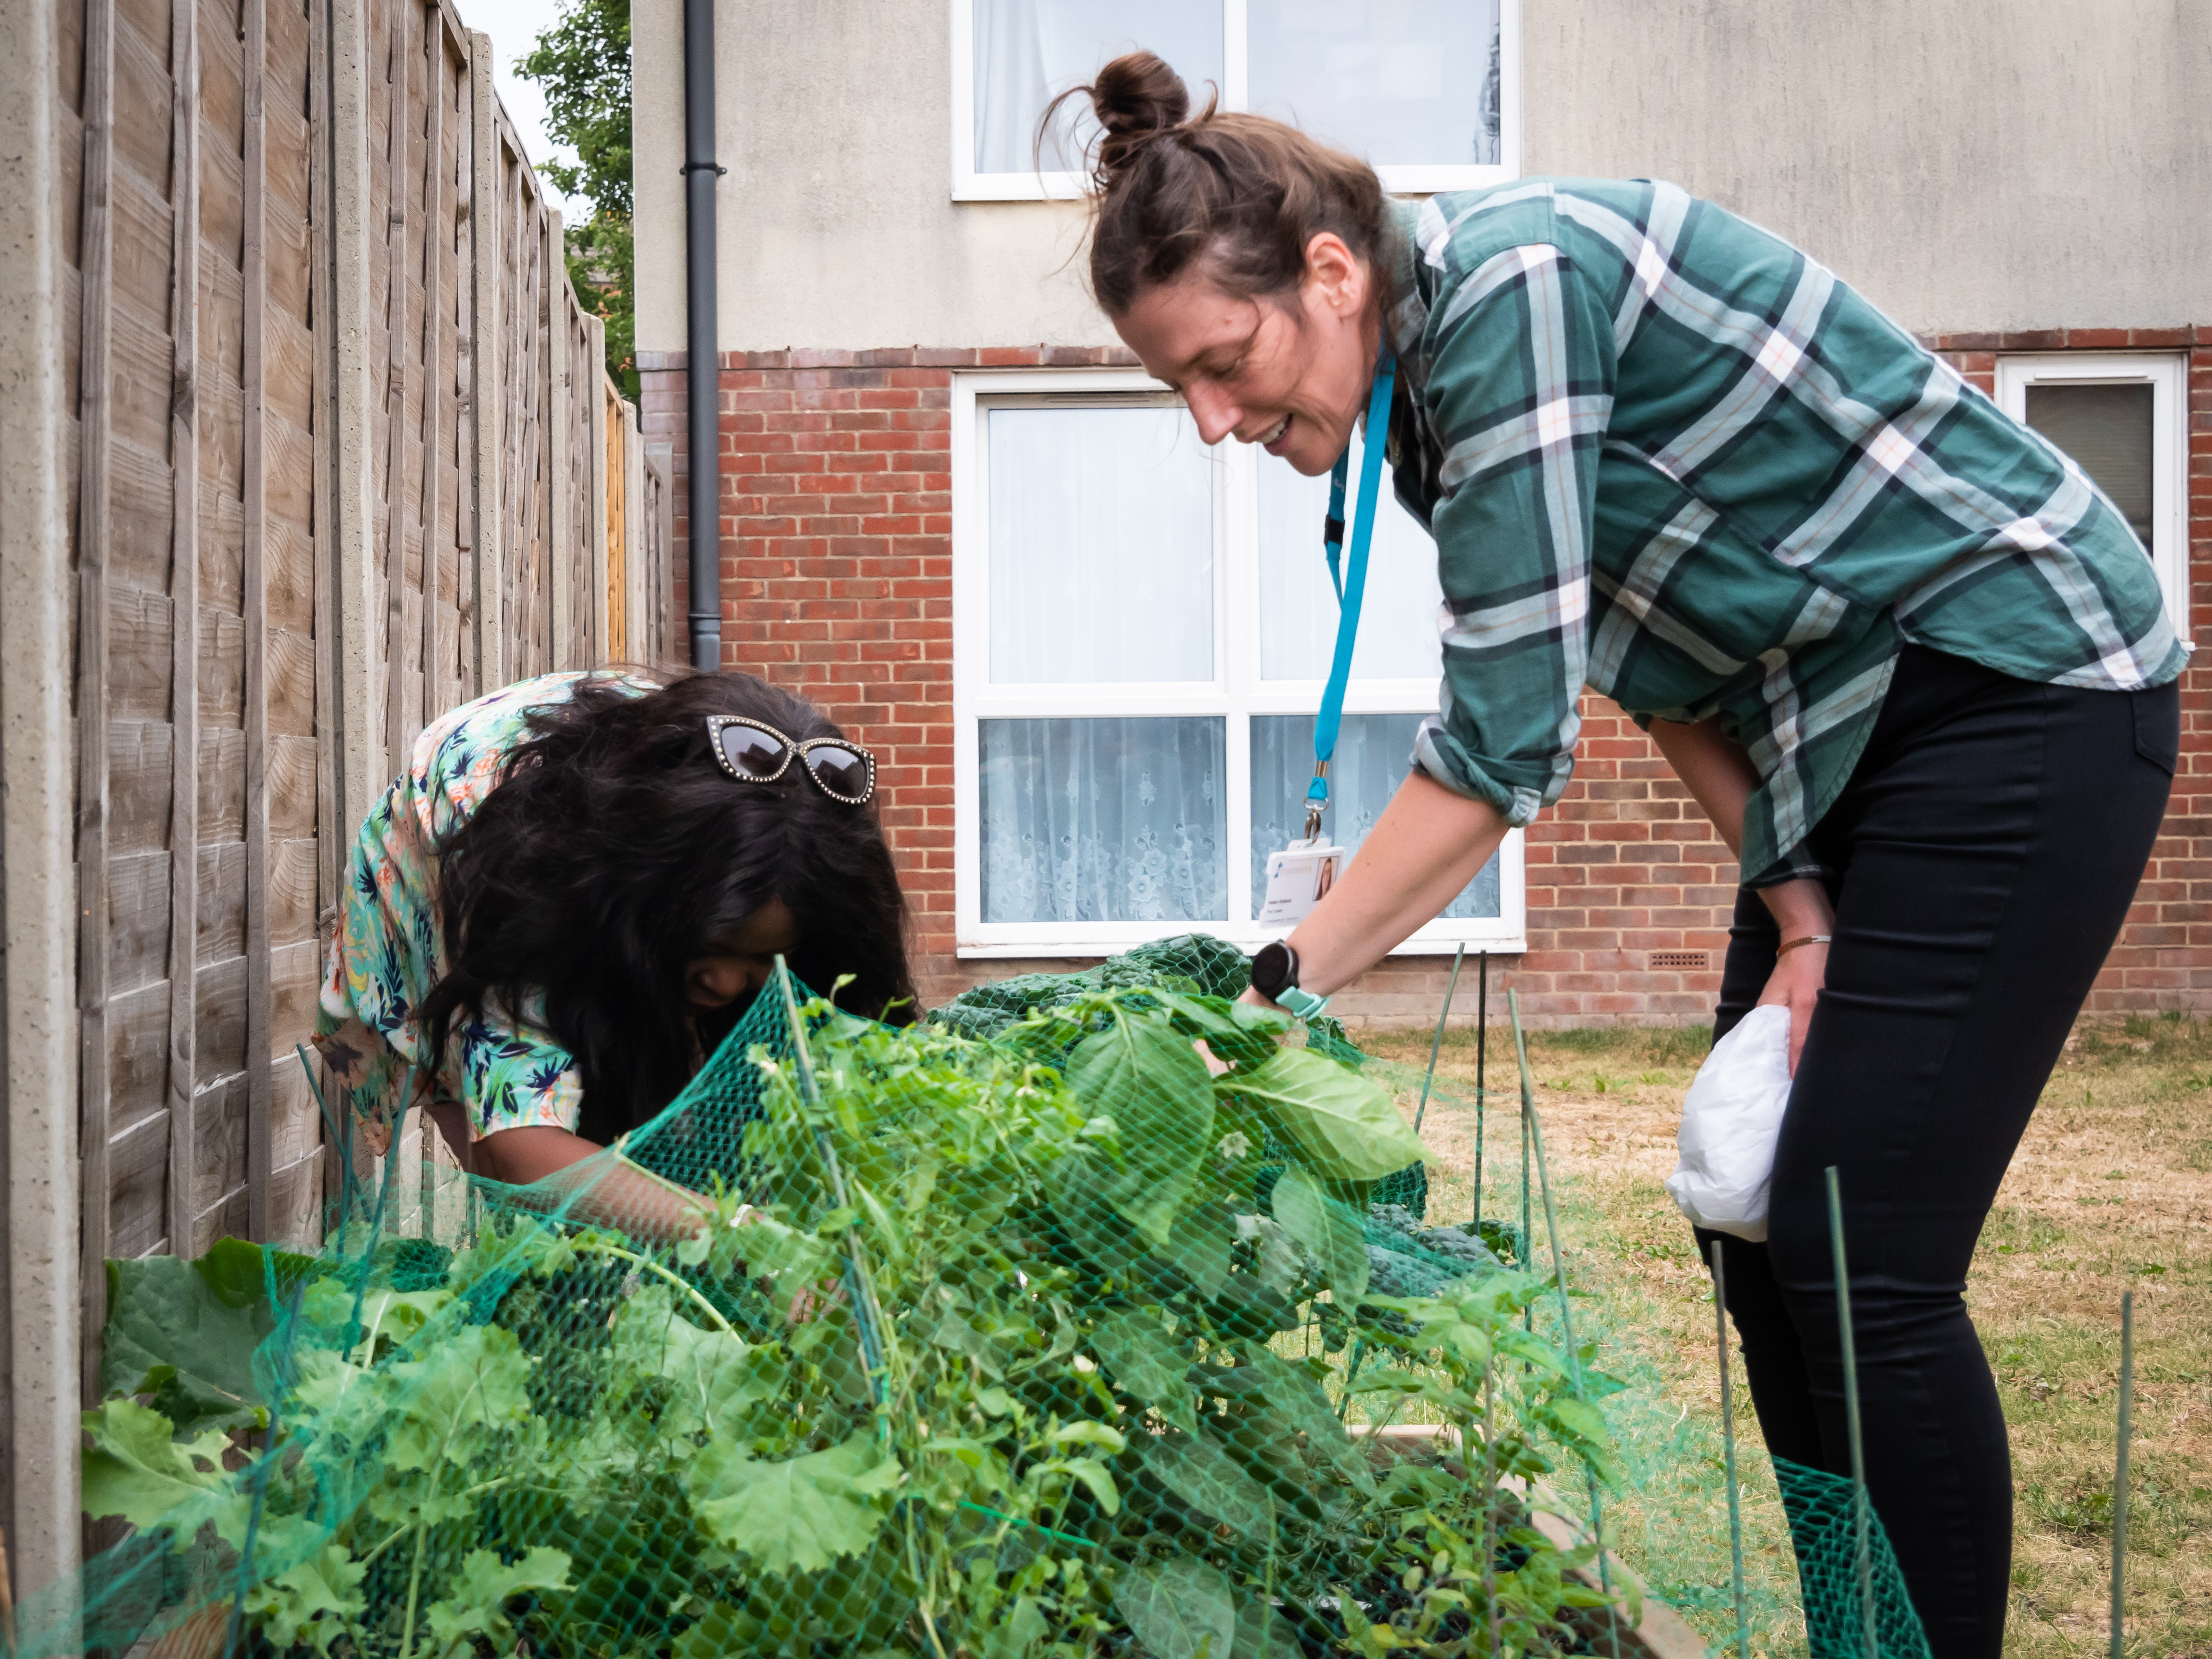 Two residents gardening, looking over a small vegetable patch with green netting over it